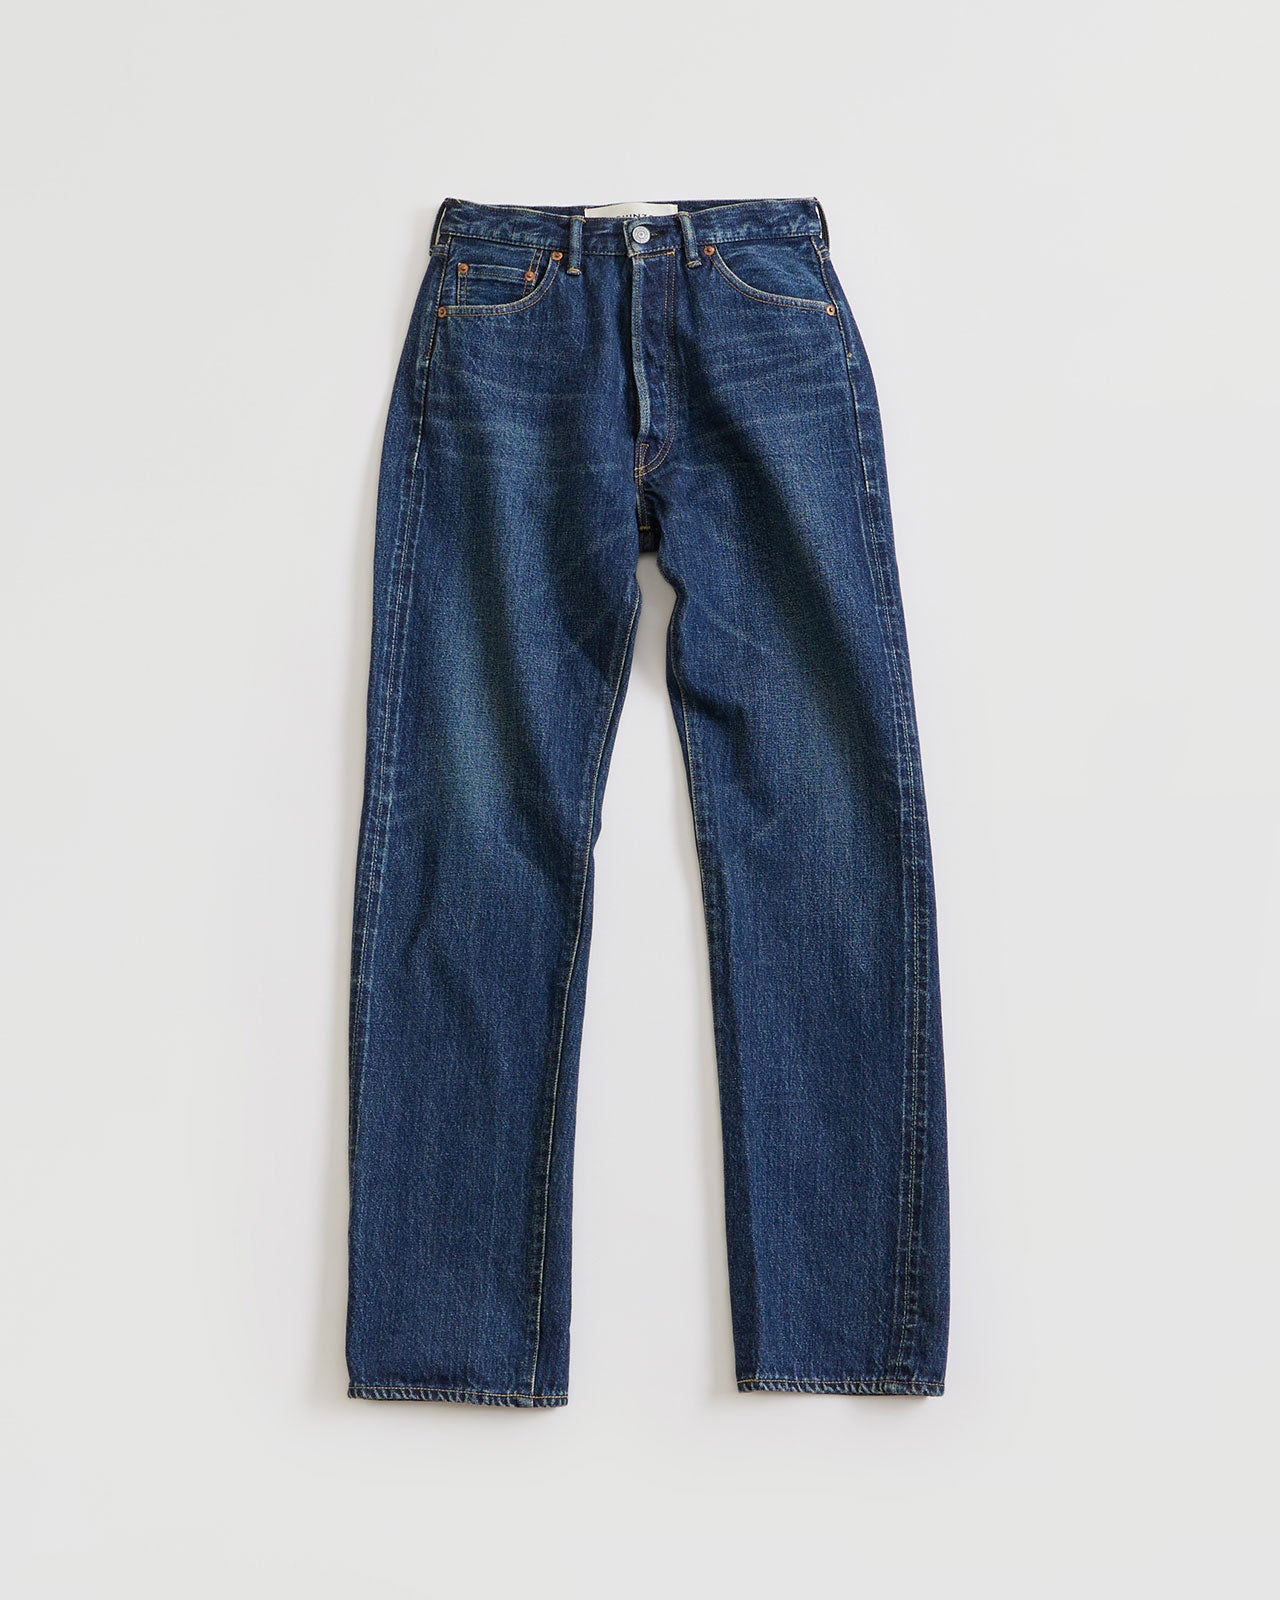 ORDINARY JEANS(BLUE)